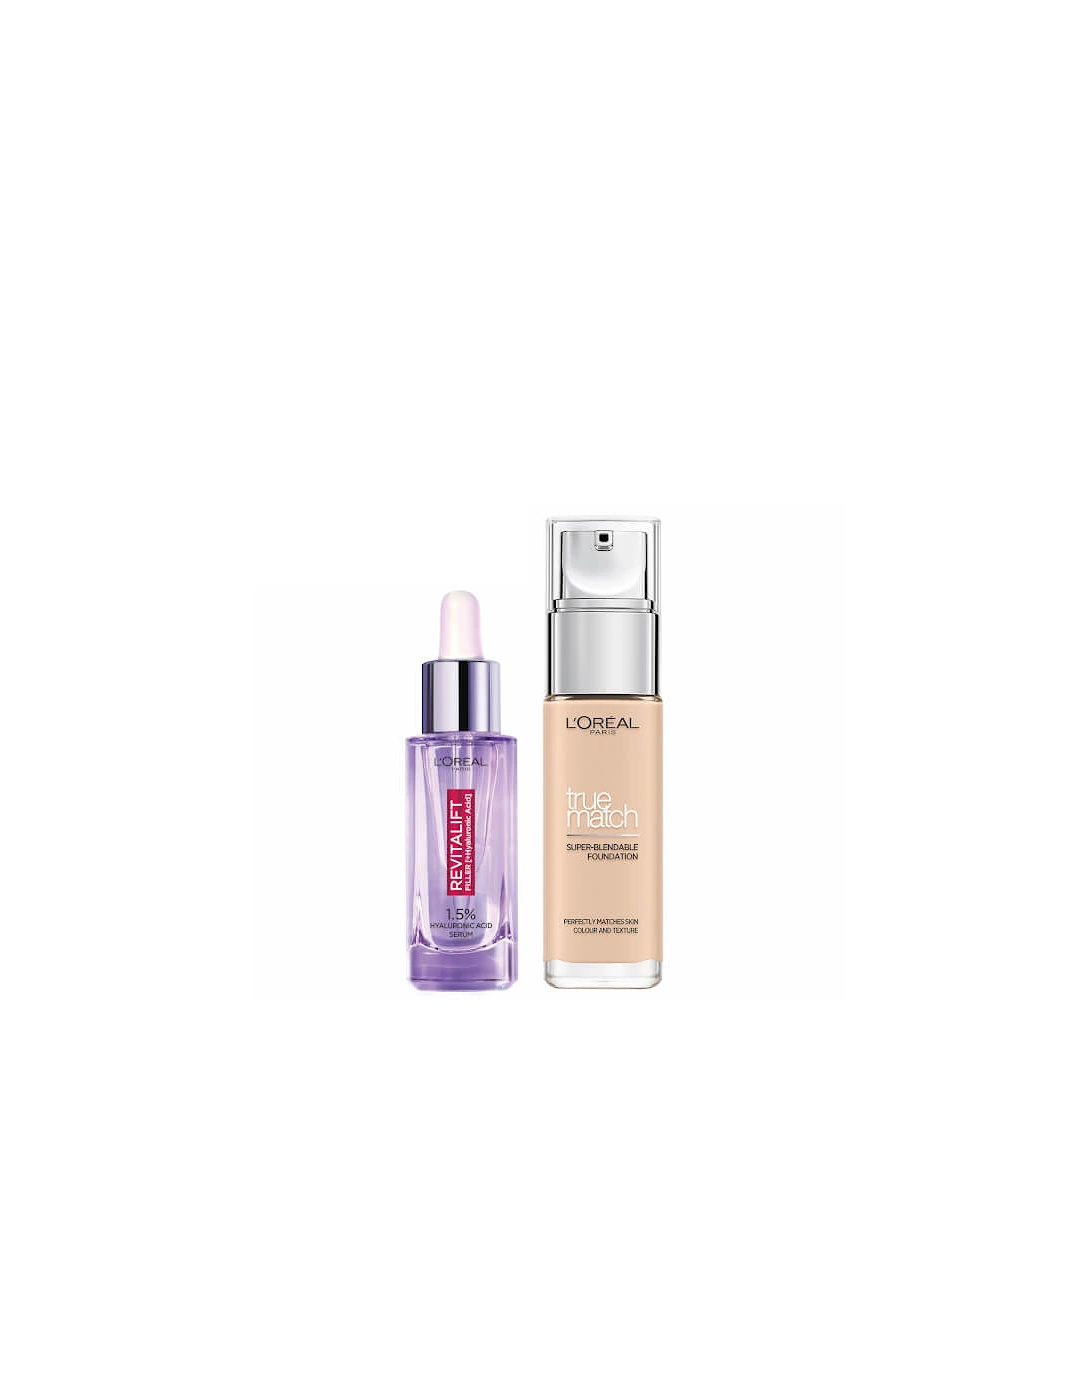 L’Oreal Paris Hyaluronic Acid Filler Serum and True Match Hyaluronic Acid Foundation Duo - 0.5N Porcelain, 2 of 1